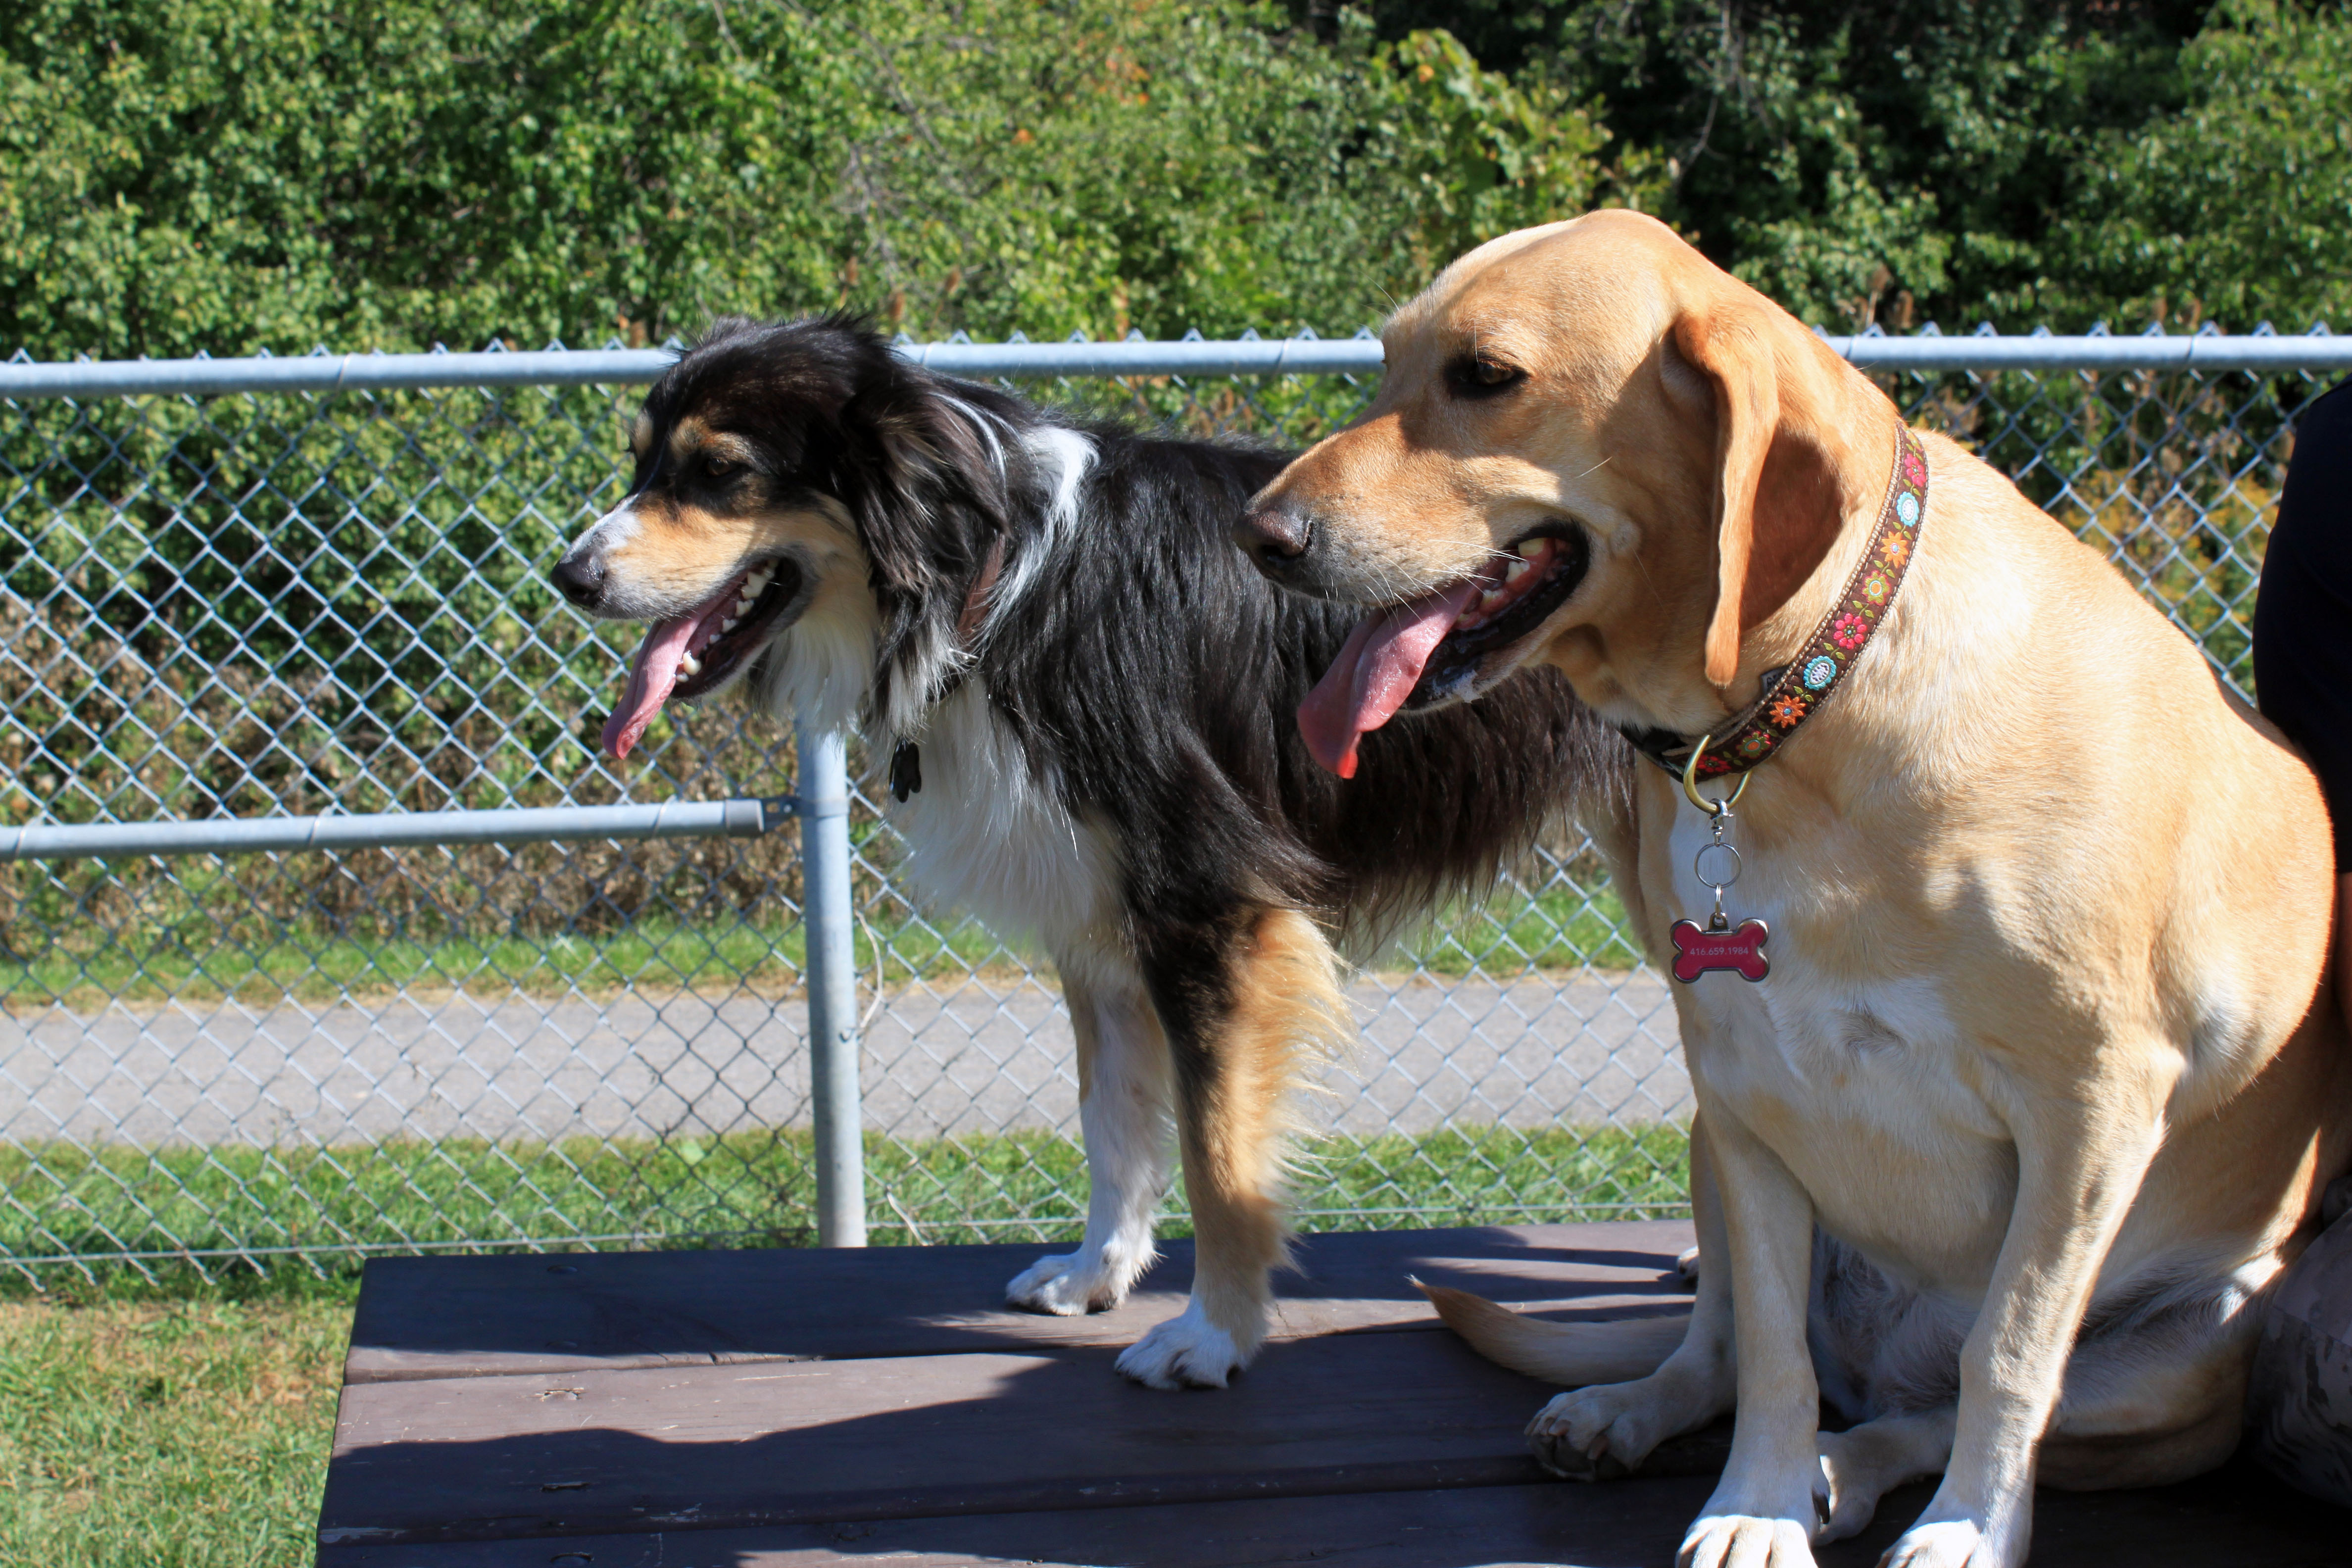  Strummer (right) with one of her friends enjoying the Kingsford leash-free dog park